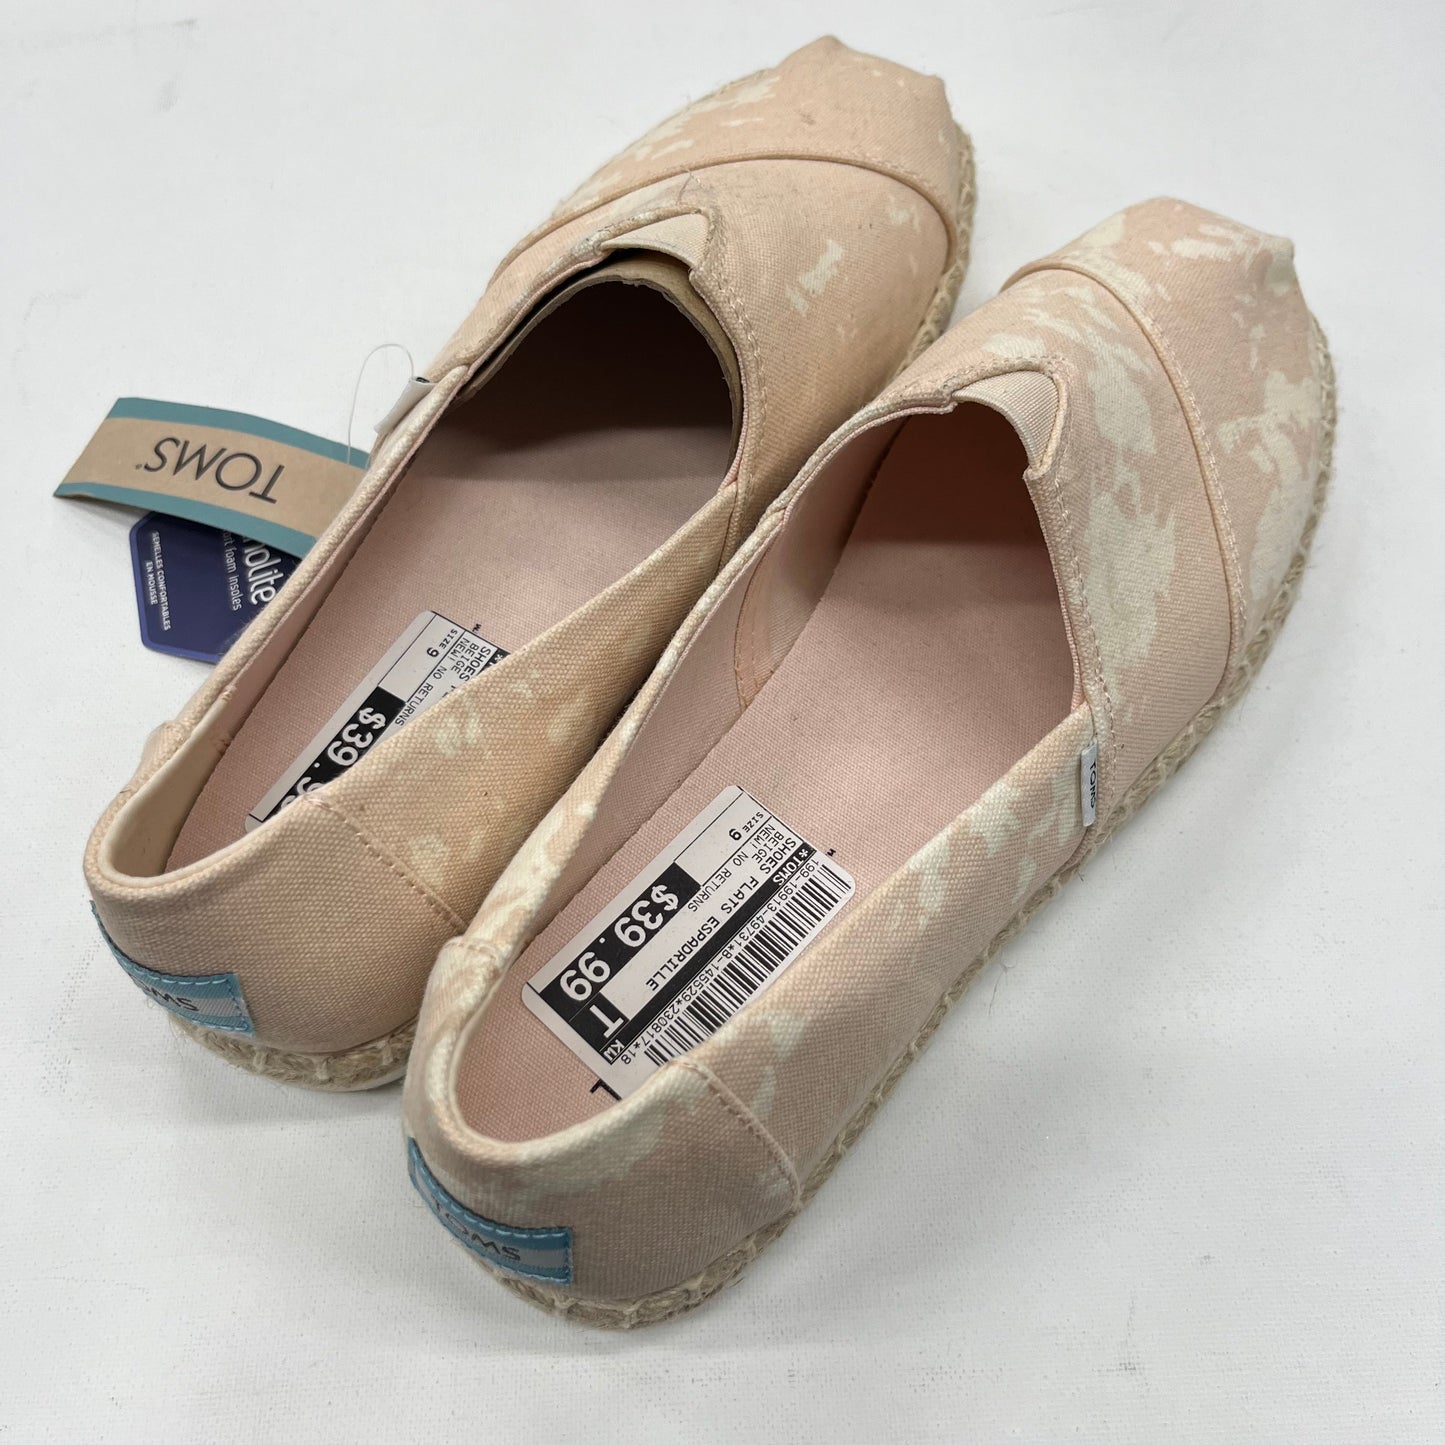 Shoes Flats Espadrille By Toms NWT  Size: 9